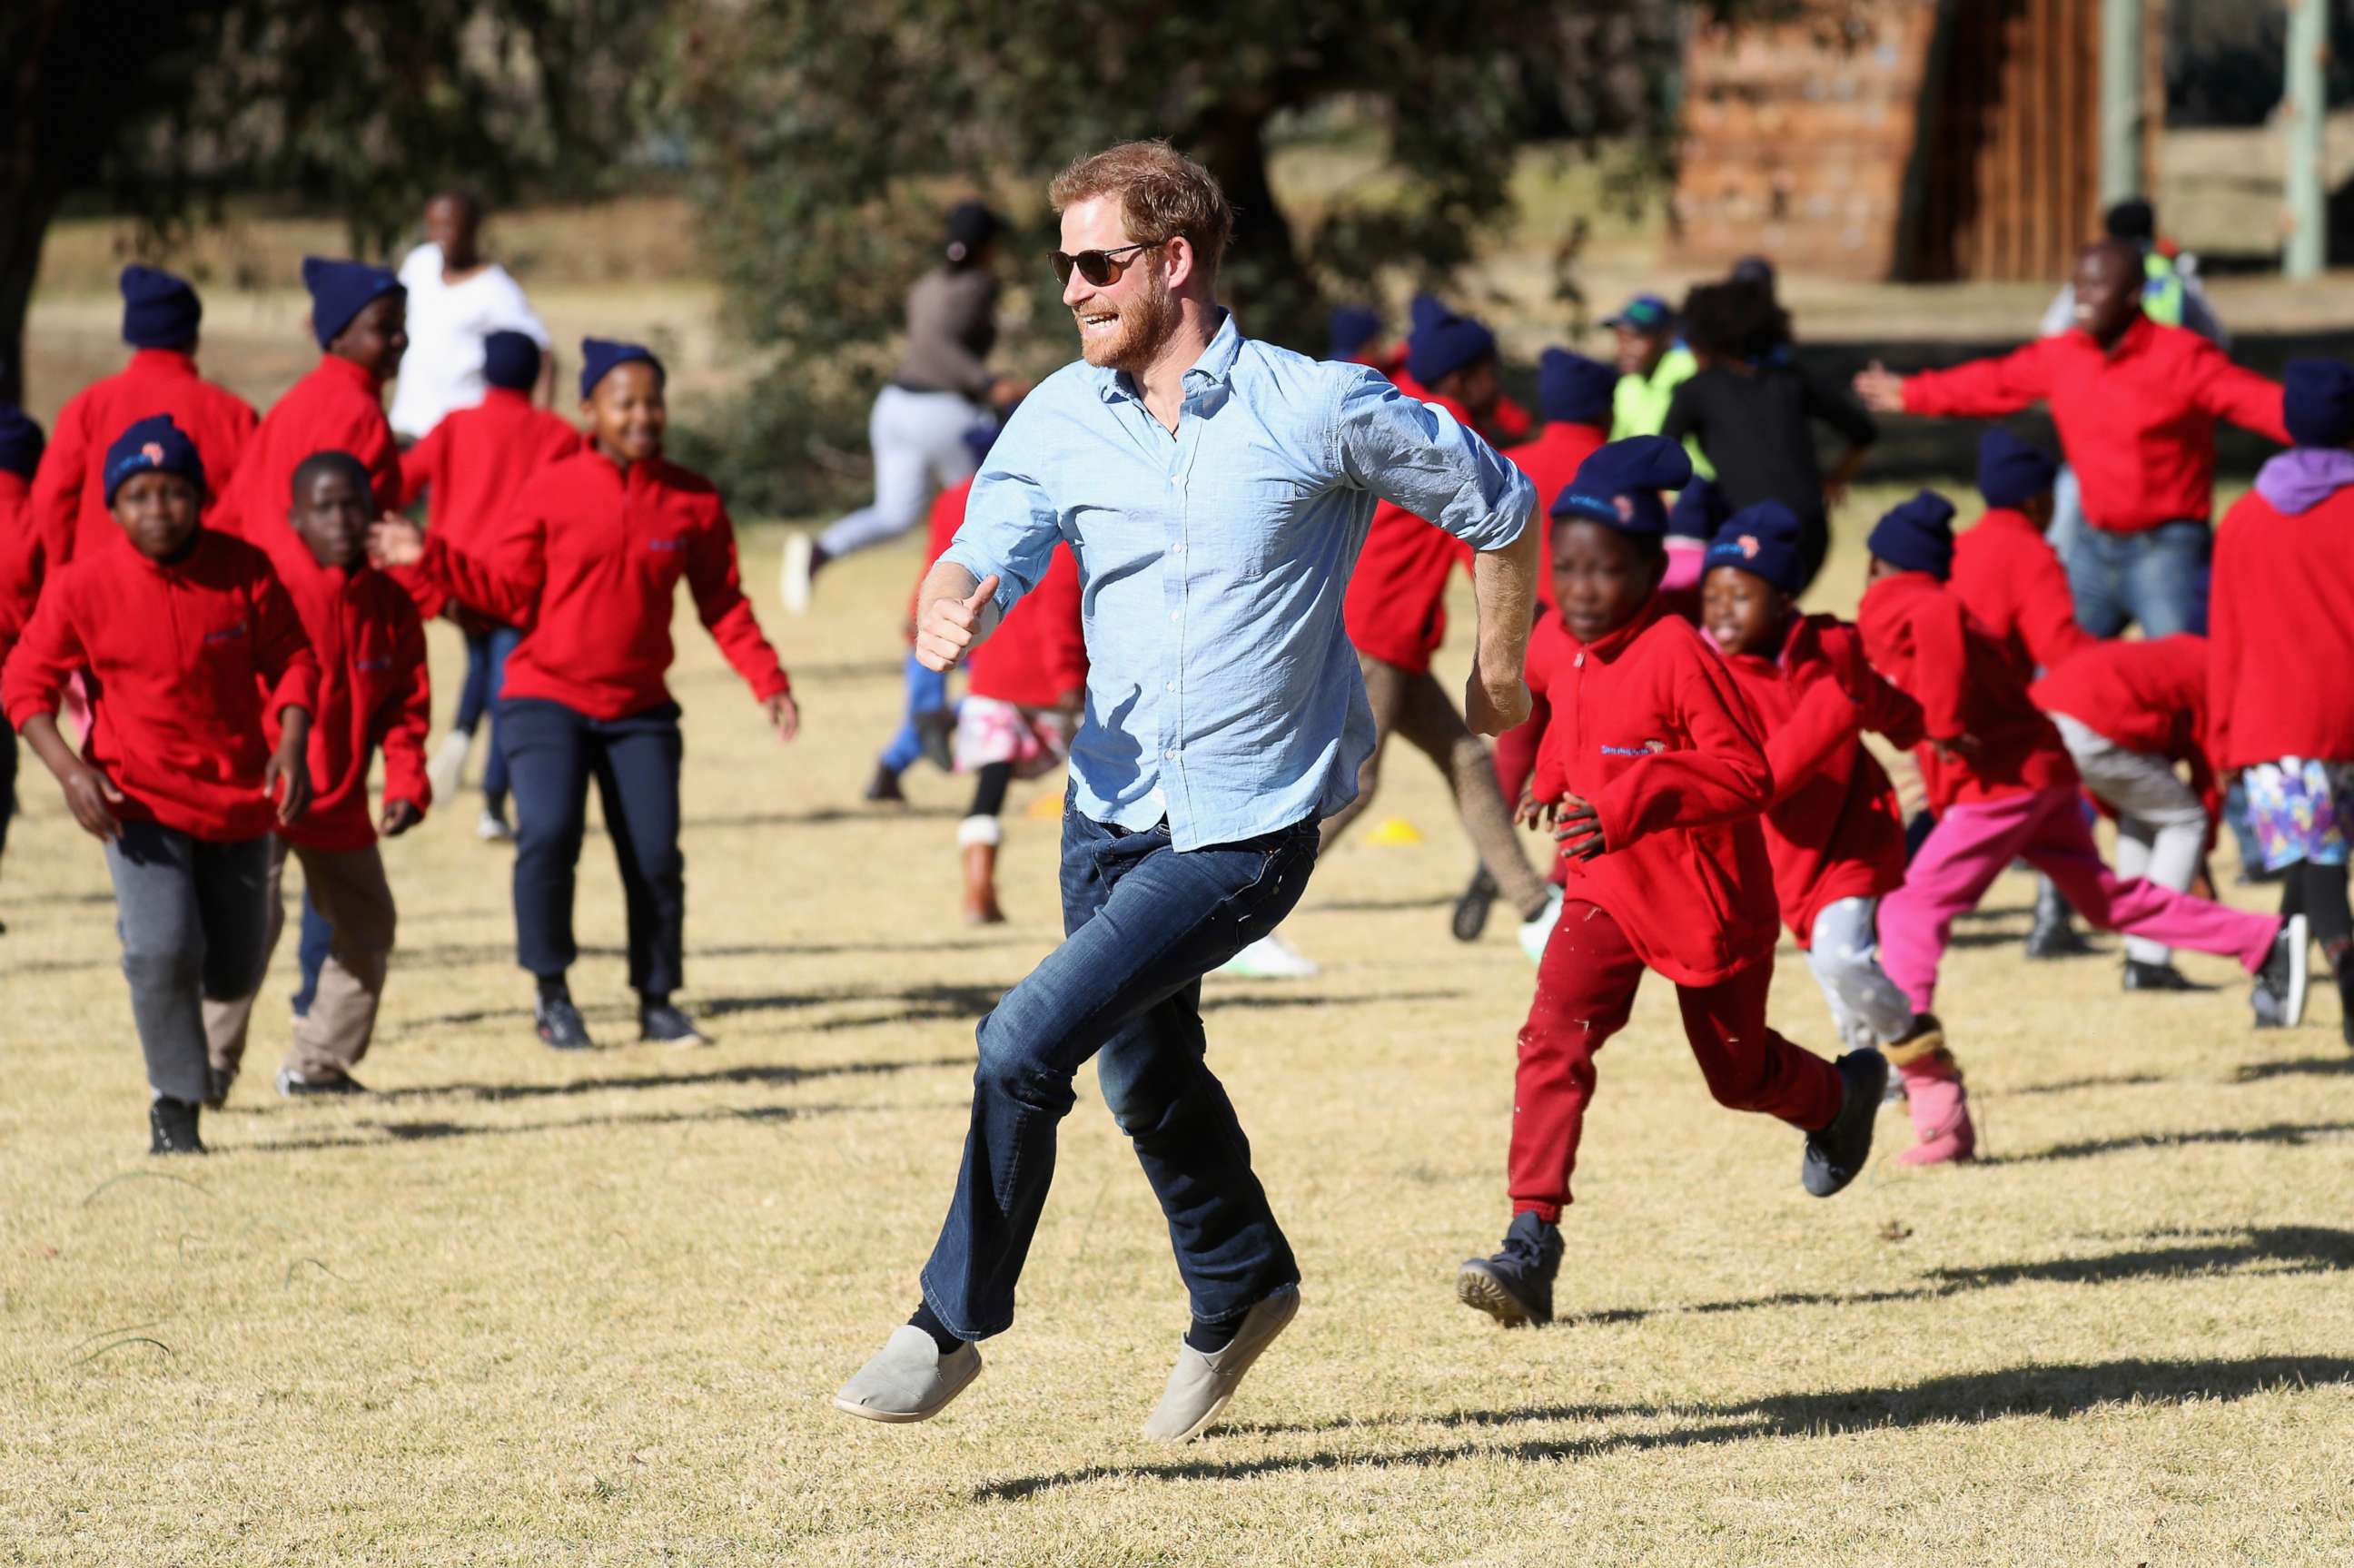 PHOTO: Prince Harry, Duke of Sussex and children run during Winter Camp at Sentebale's Mamohato Children's Centre on June 22, 2018 near Maseru, Lesotho.